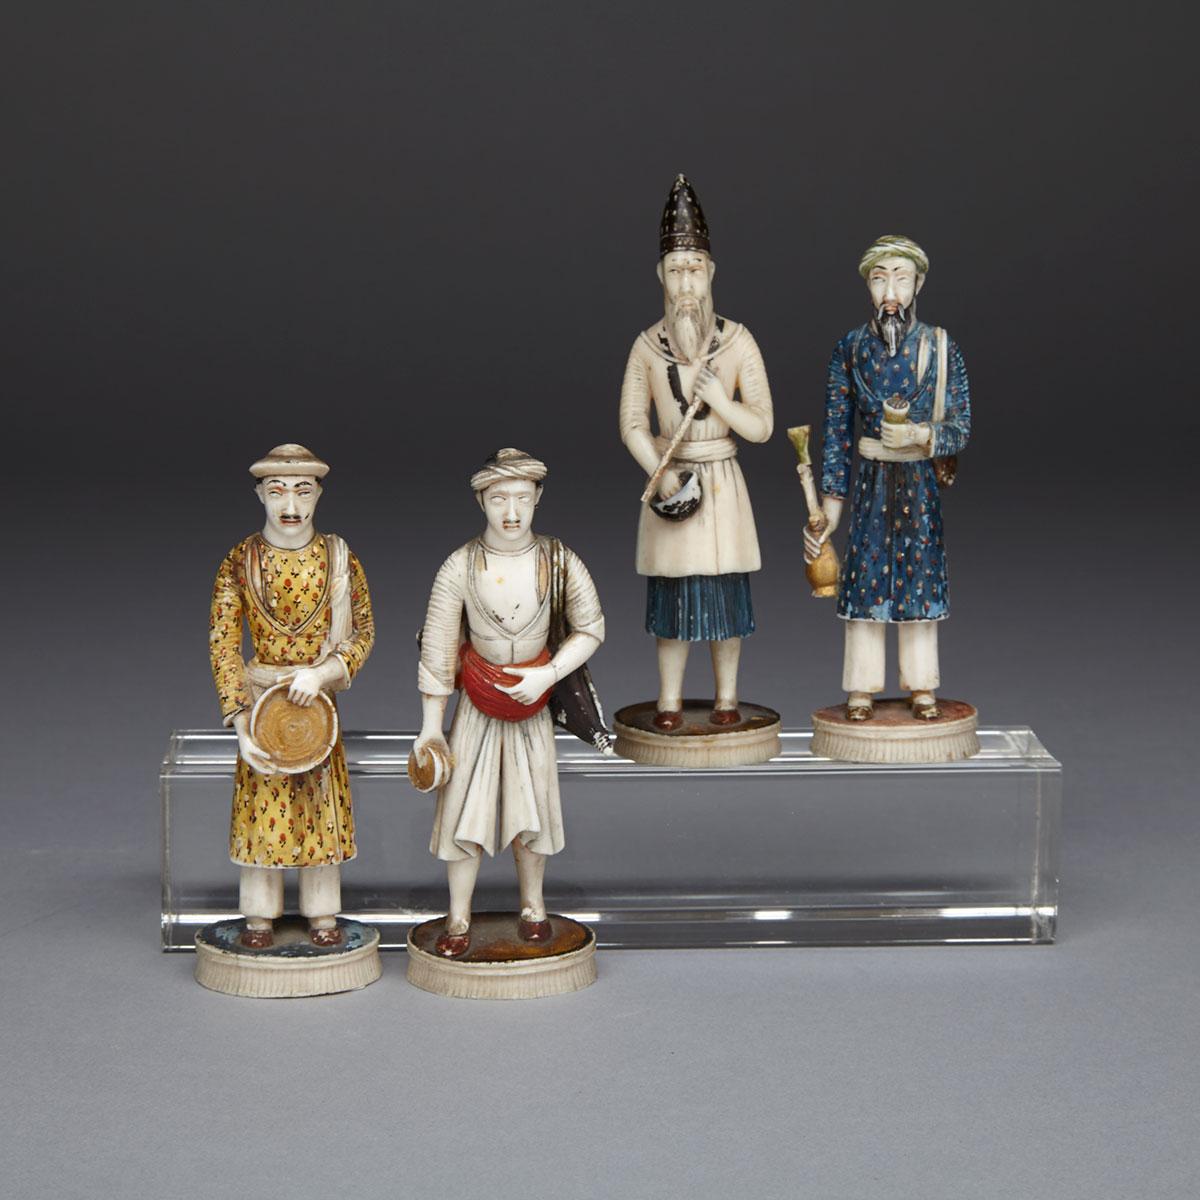 Four Persian Carved and Polychromed Ivory Figural Chess Pieces, 19th century or earlier